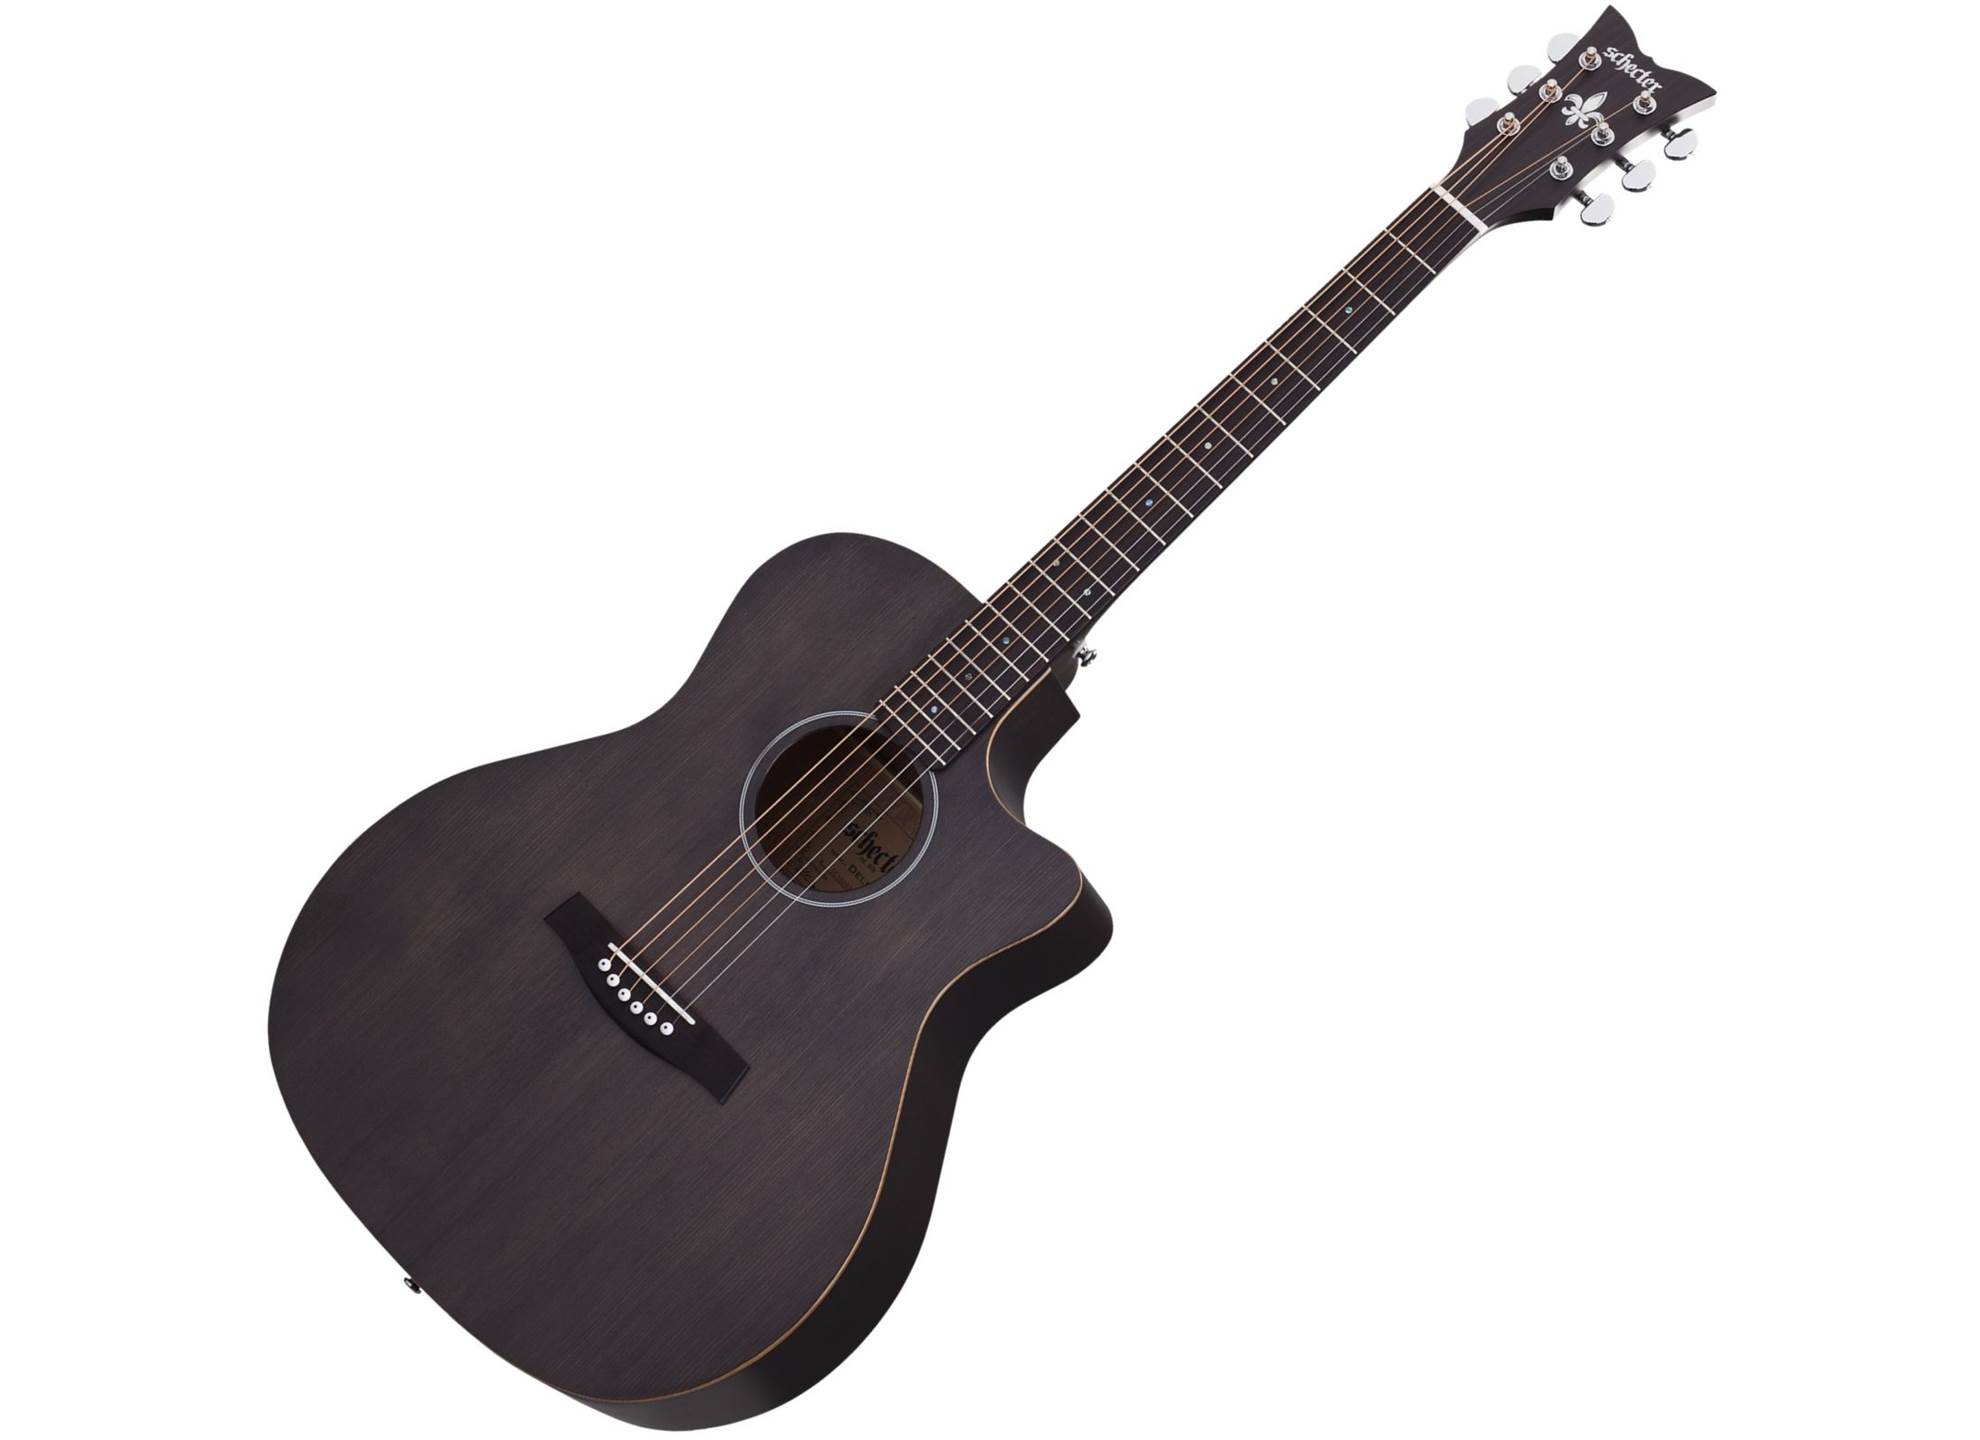 Deluxe Acoustic Satin See Thru Black